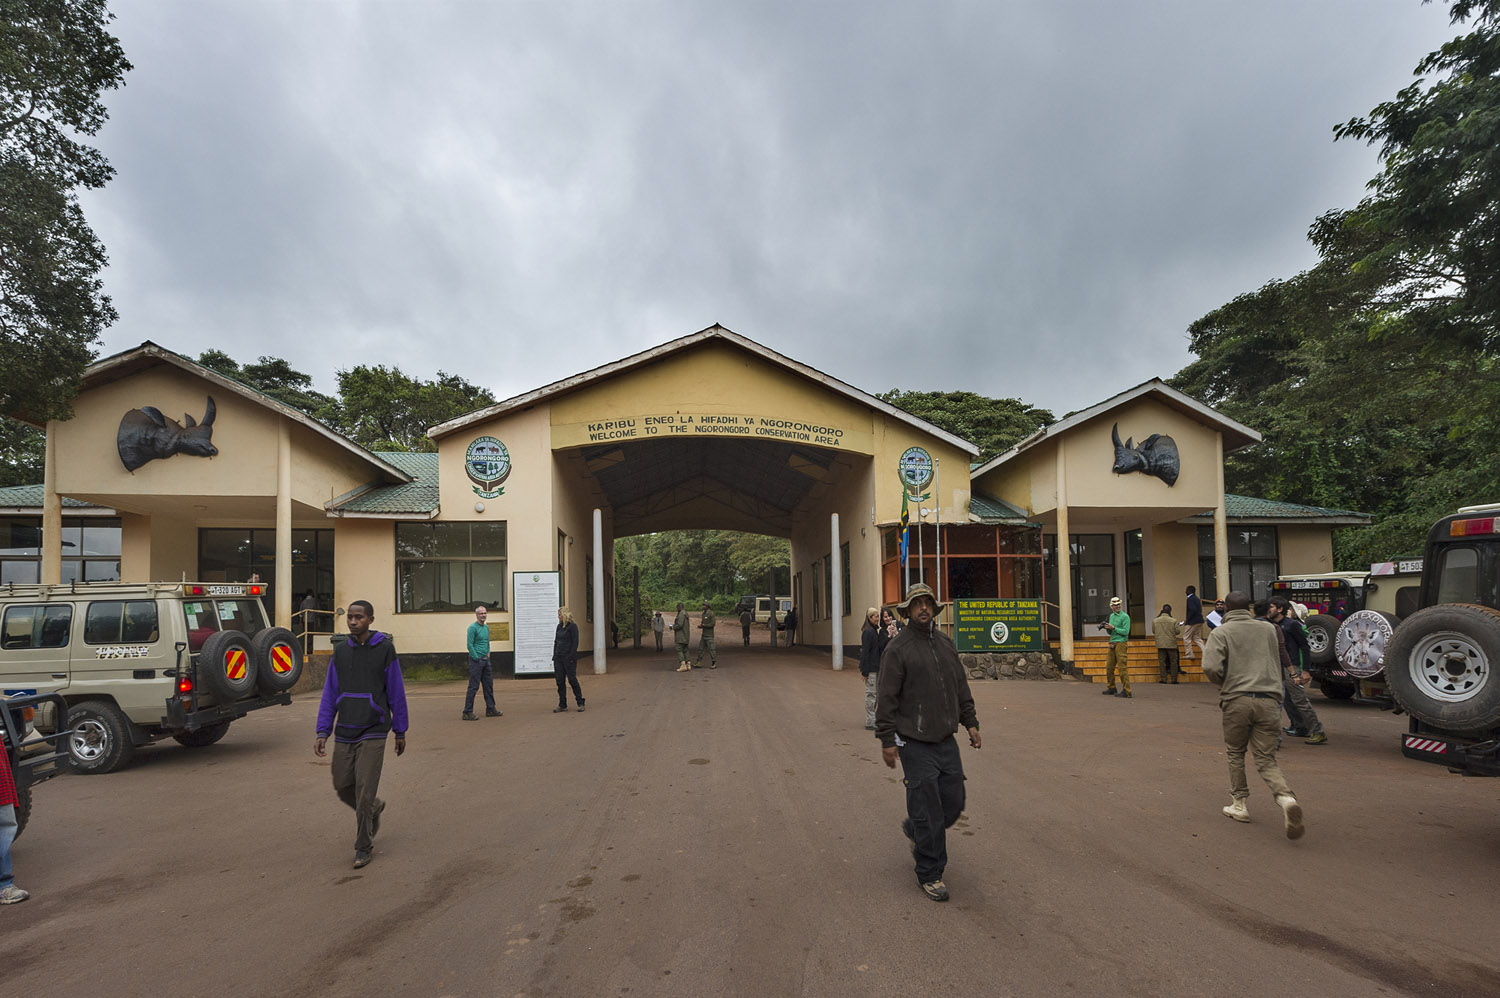 the entrance to the Ngorongoro crater